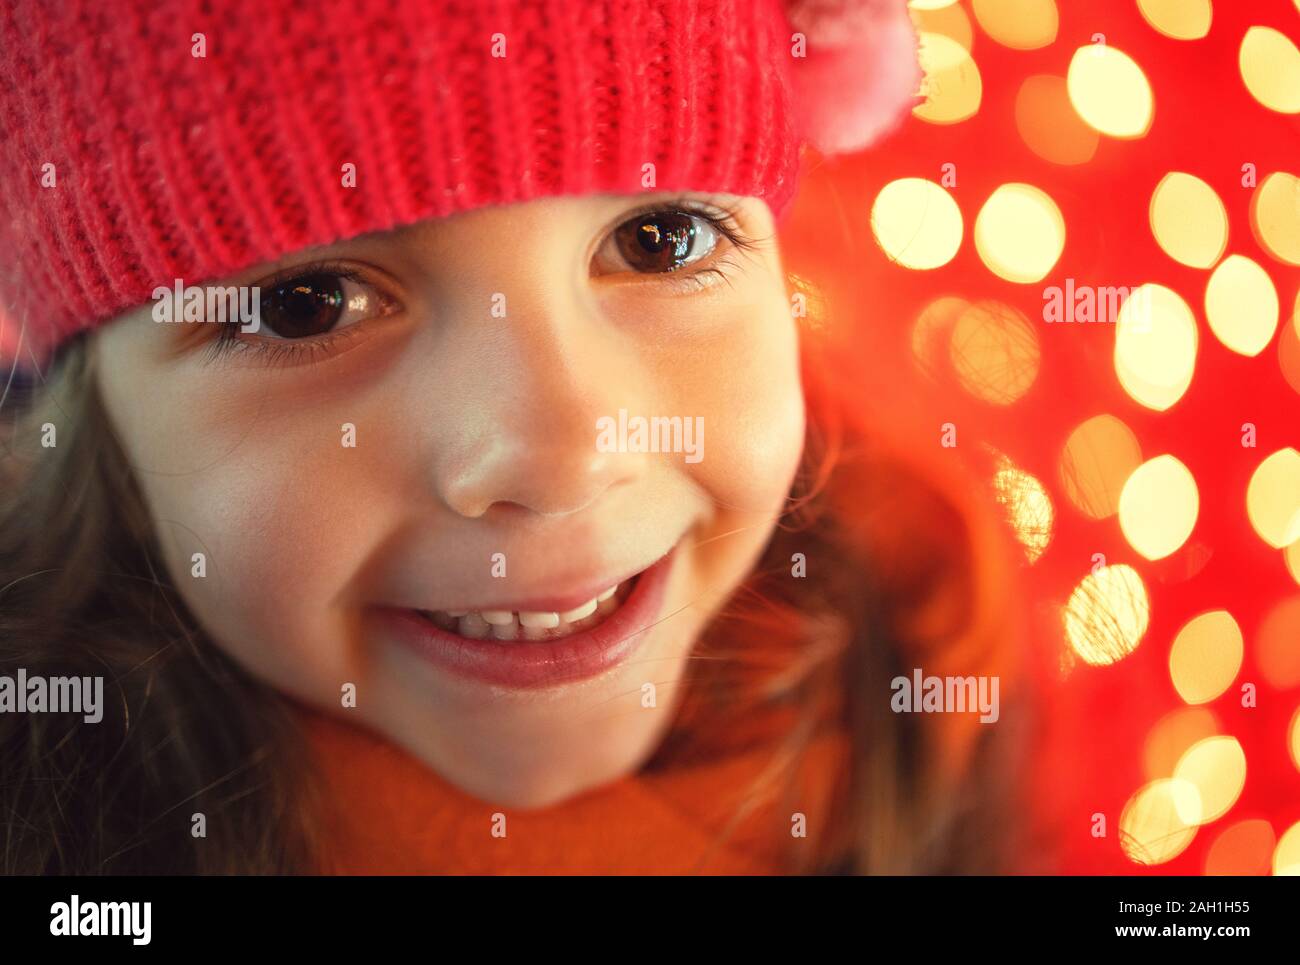 Happy little girl and Christmas lights on background. Happy new year. Stock Photo